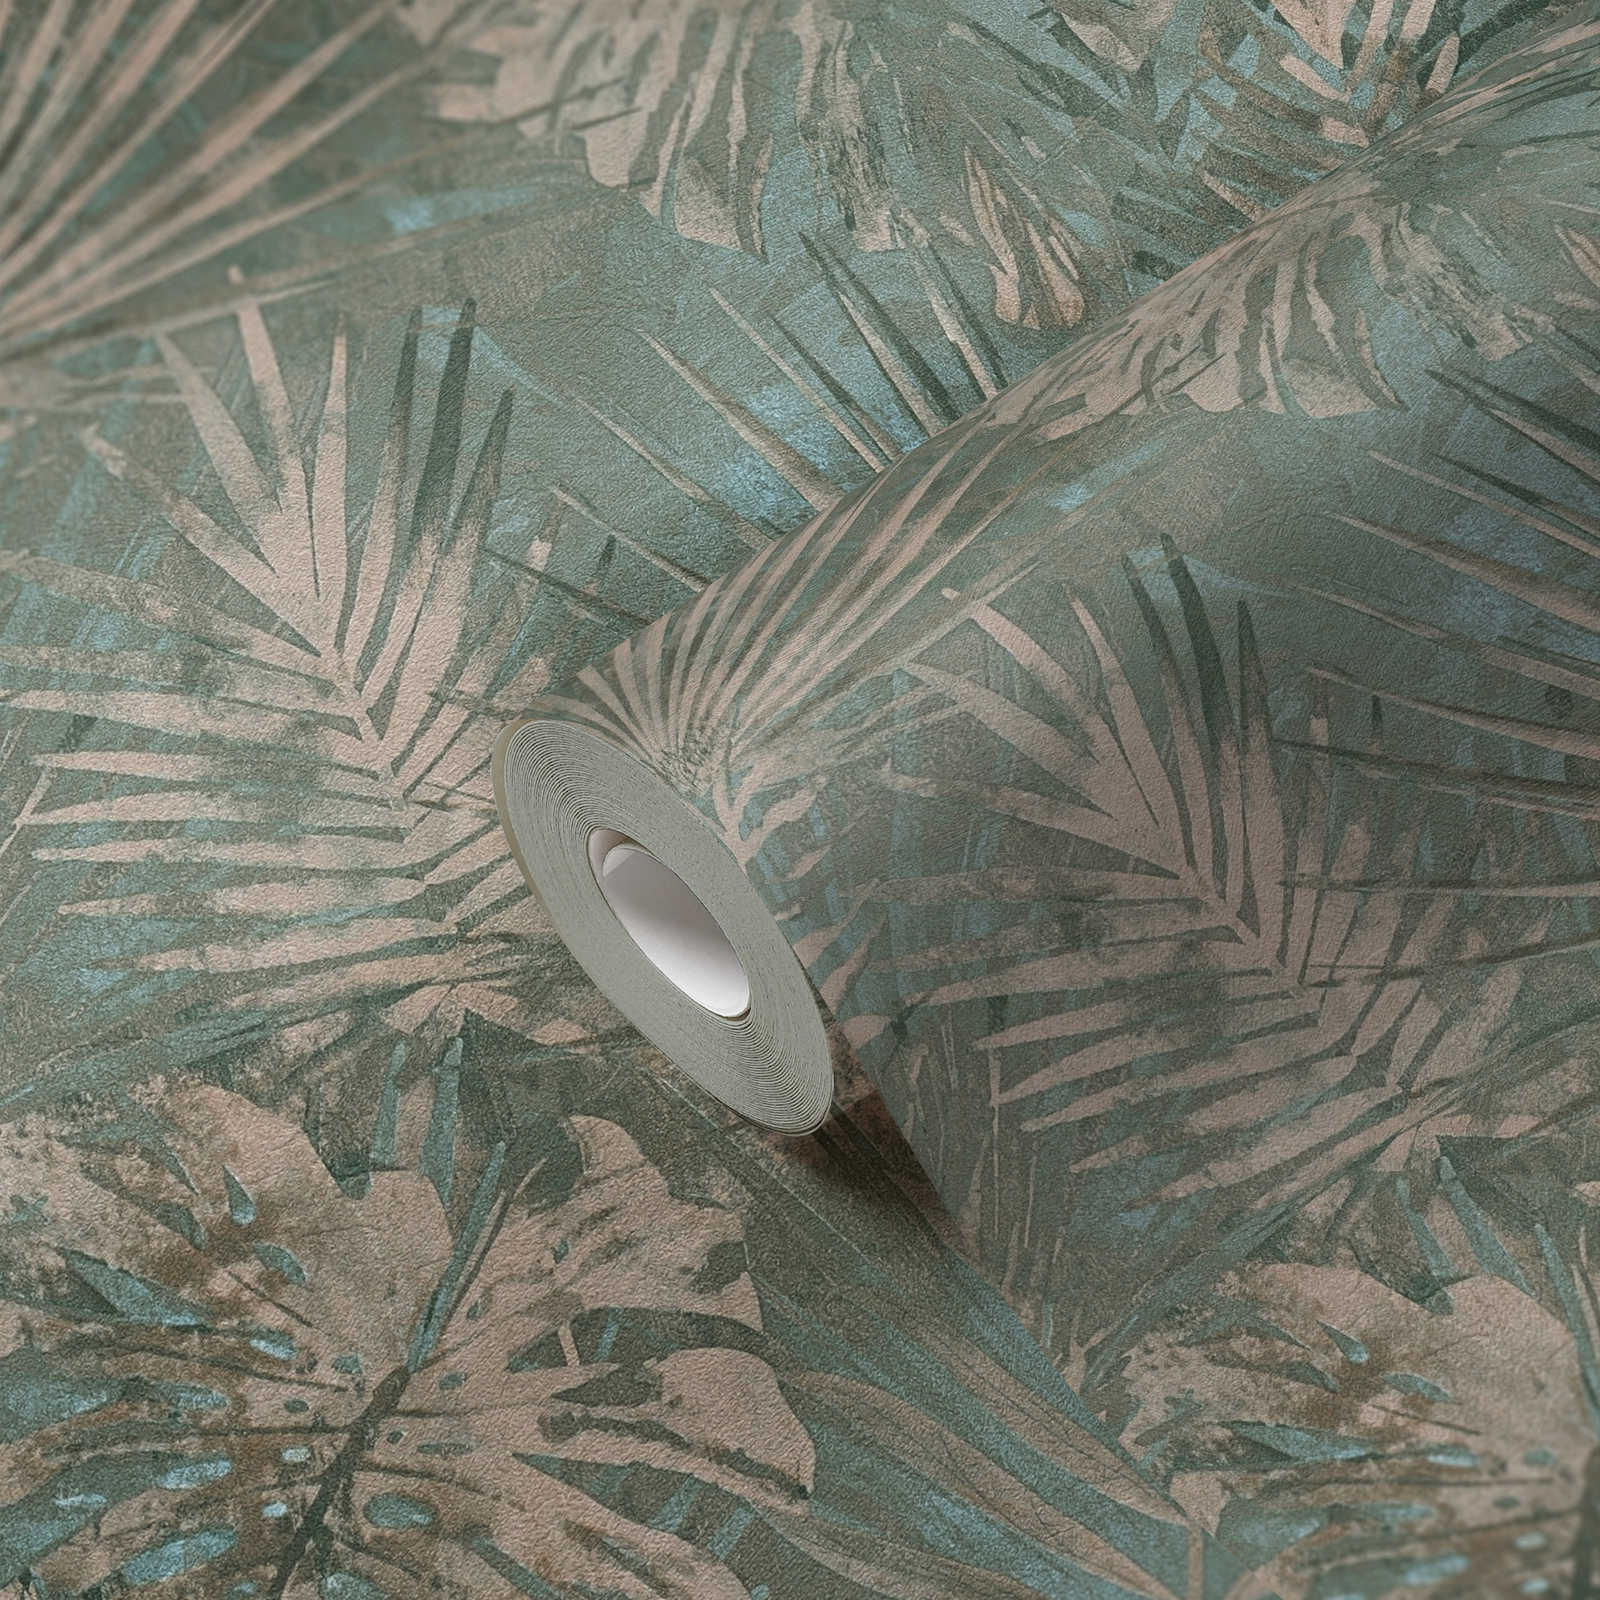             PVC-free wallpaper with jungle pattern in used look - green, blue, beige
        